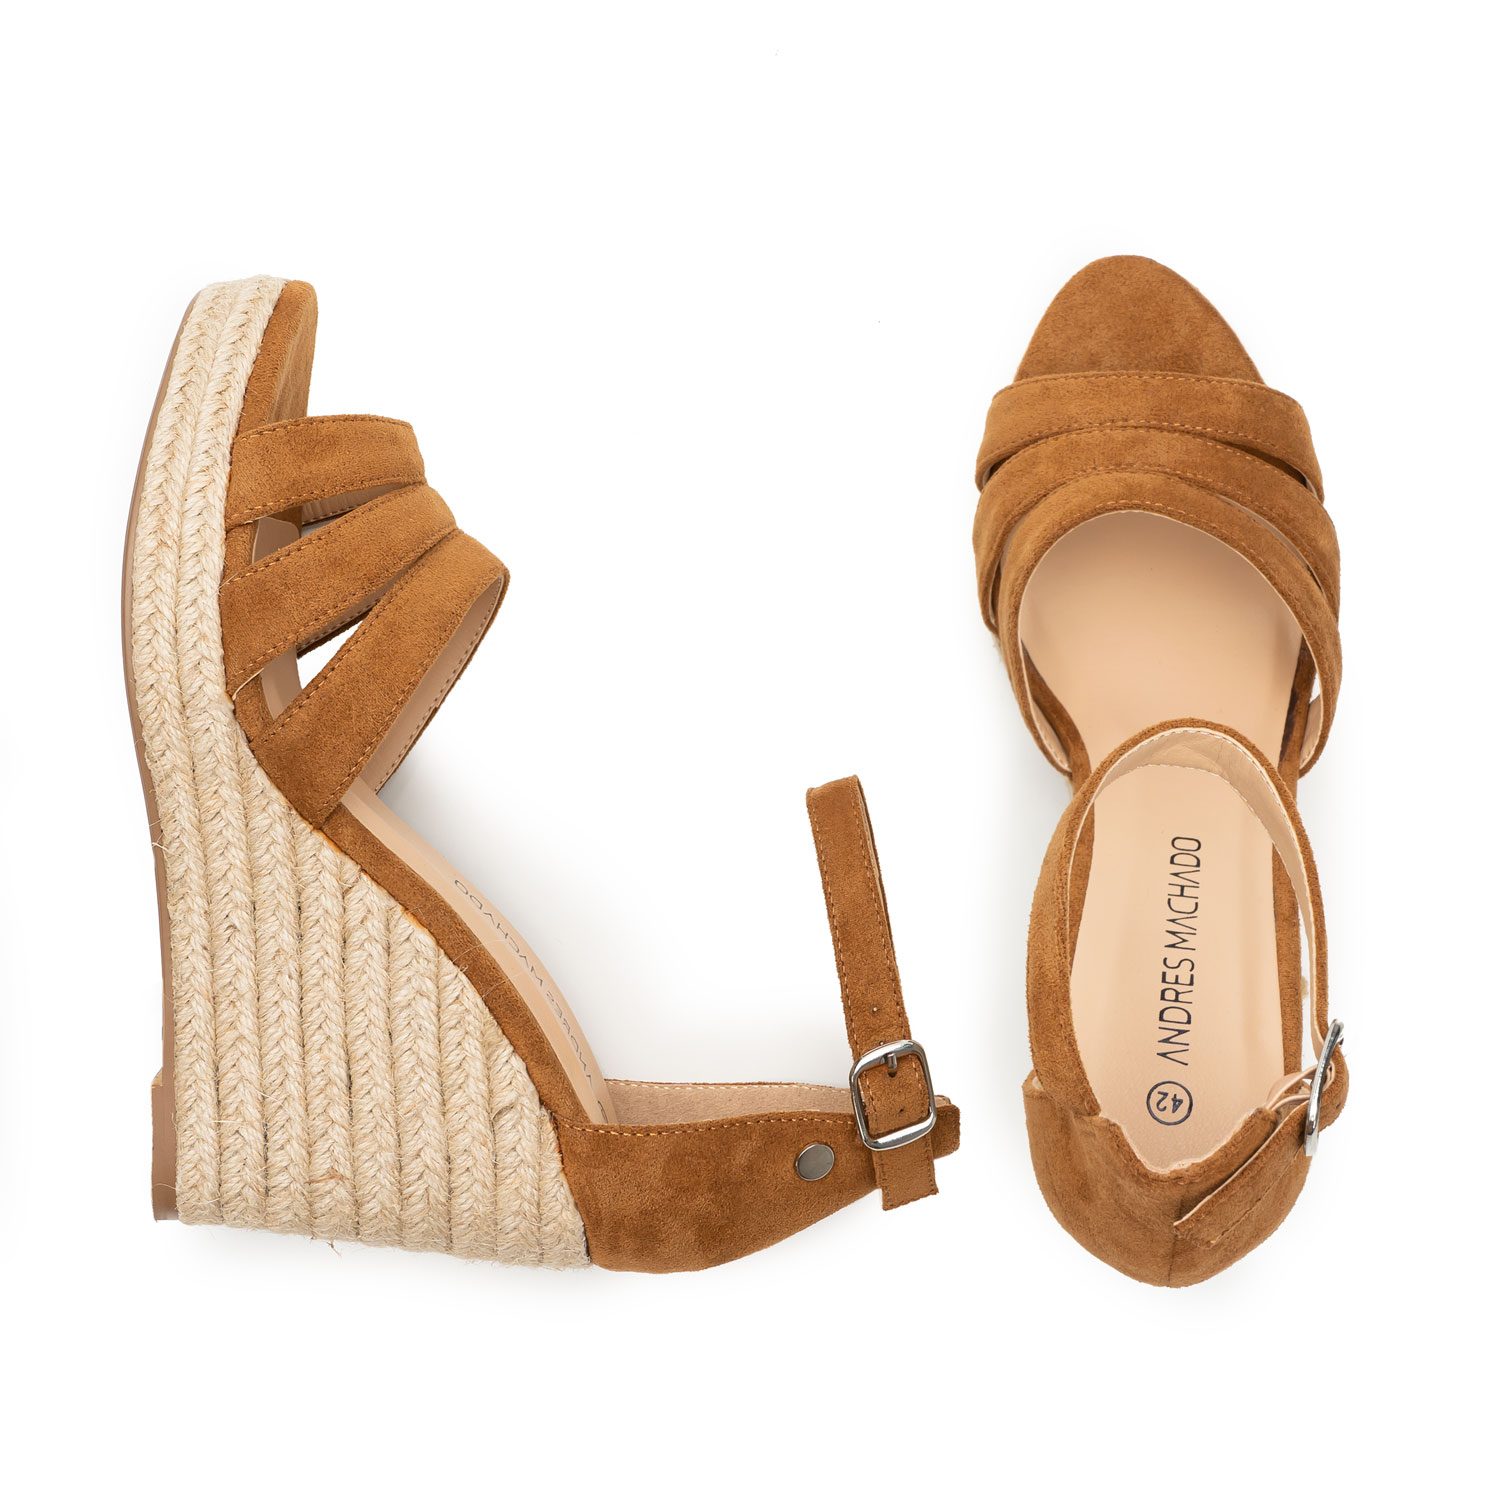 Camel Faux Suede Espadrilles with Jute Wedge 